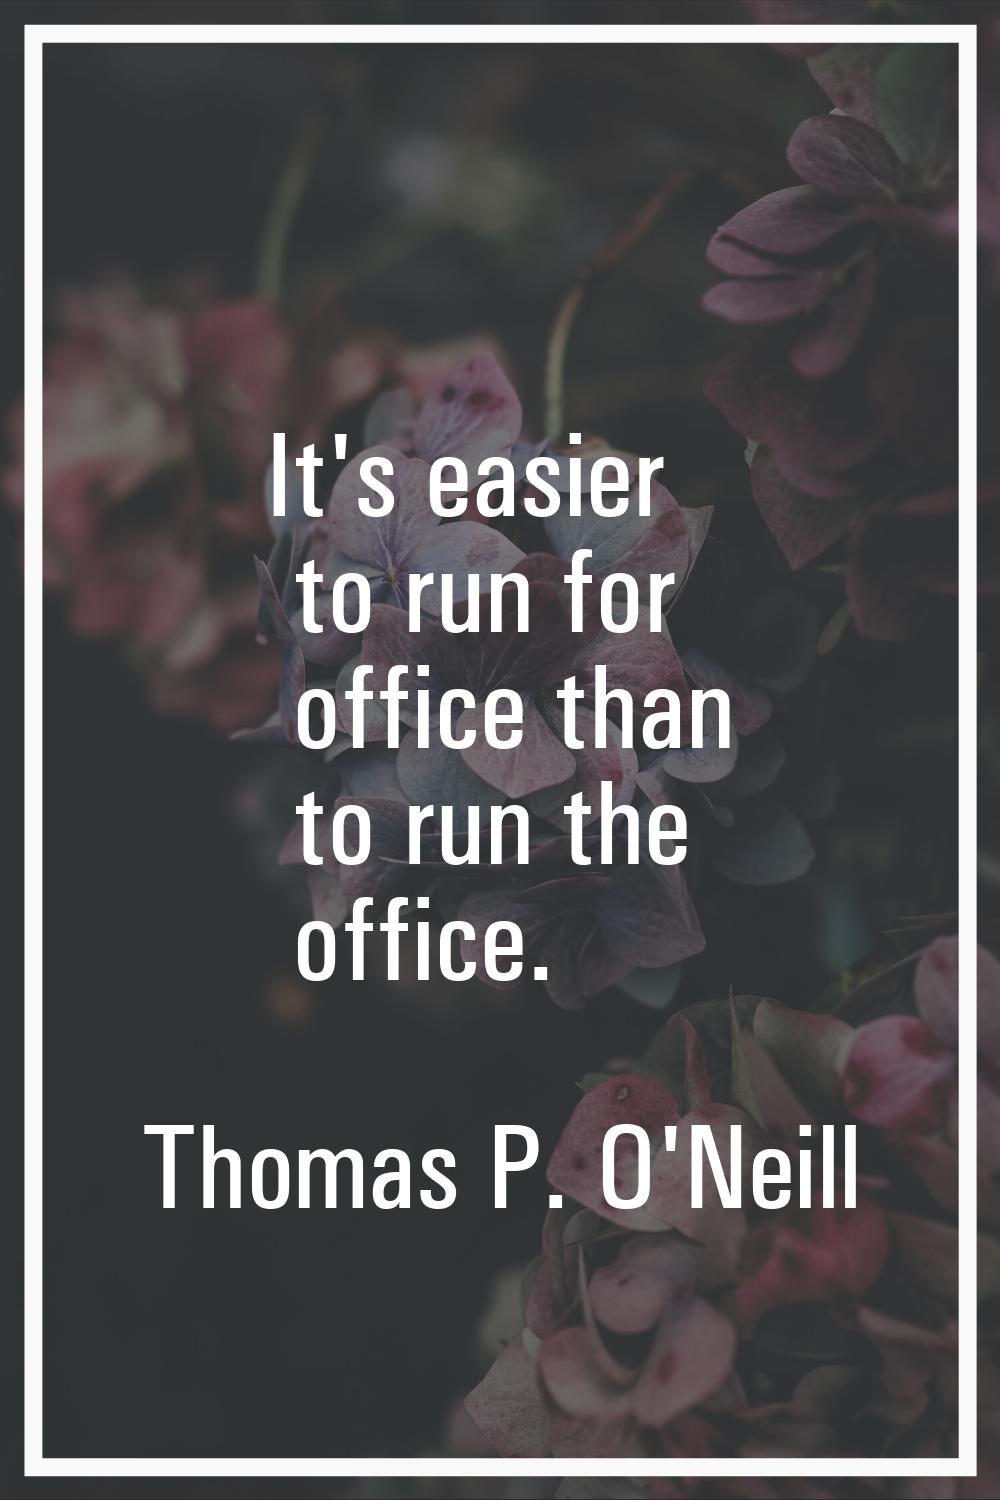 It's easier to run for office than to run the office.